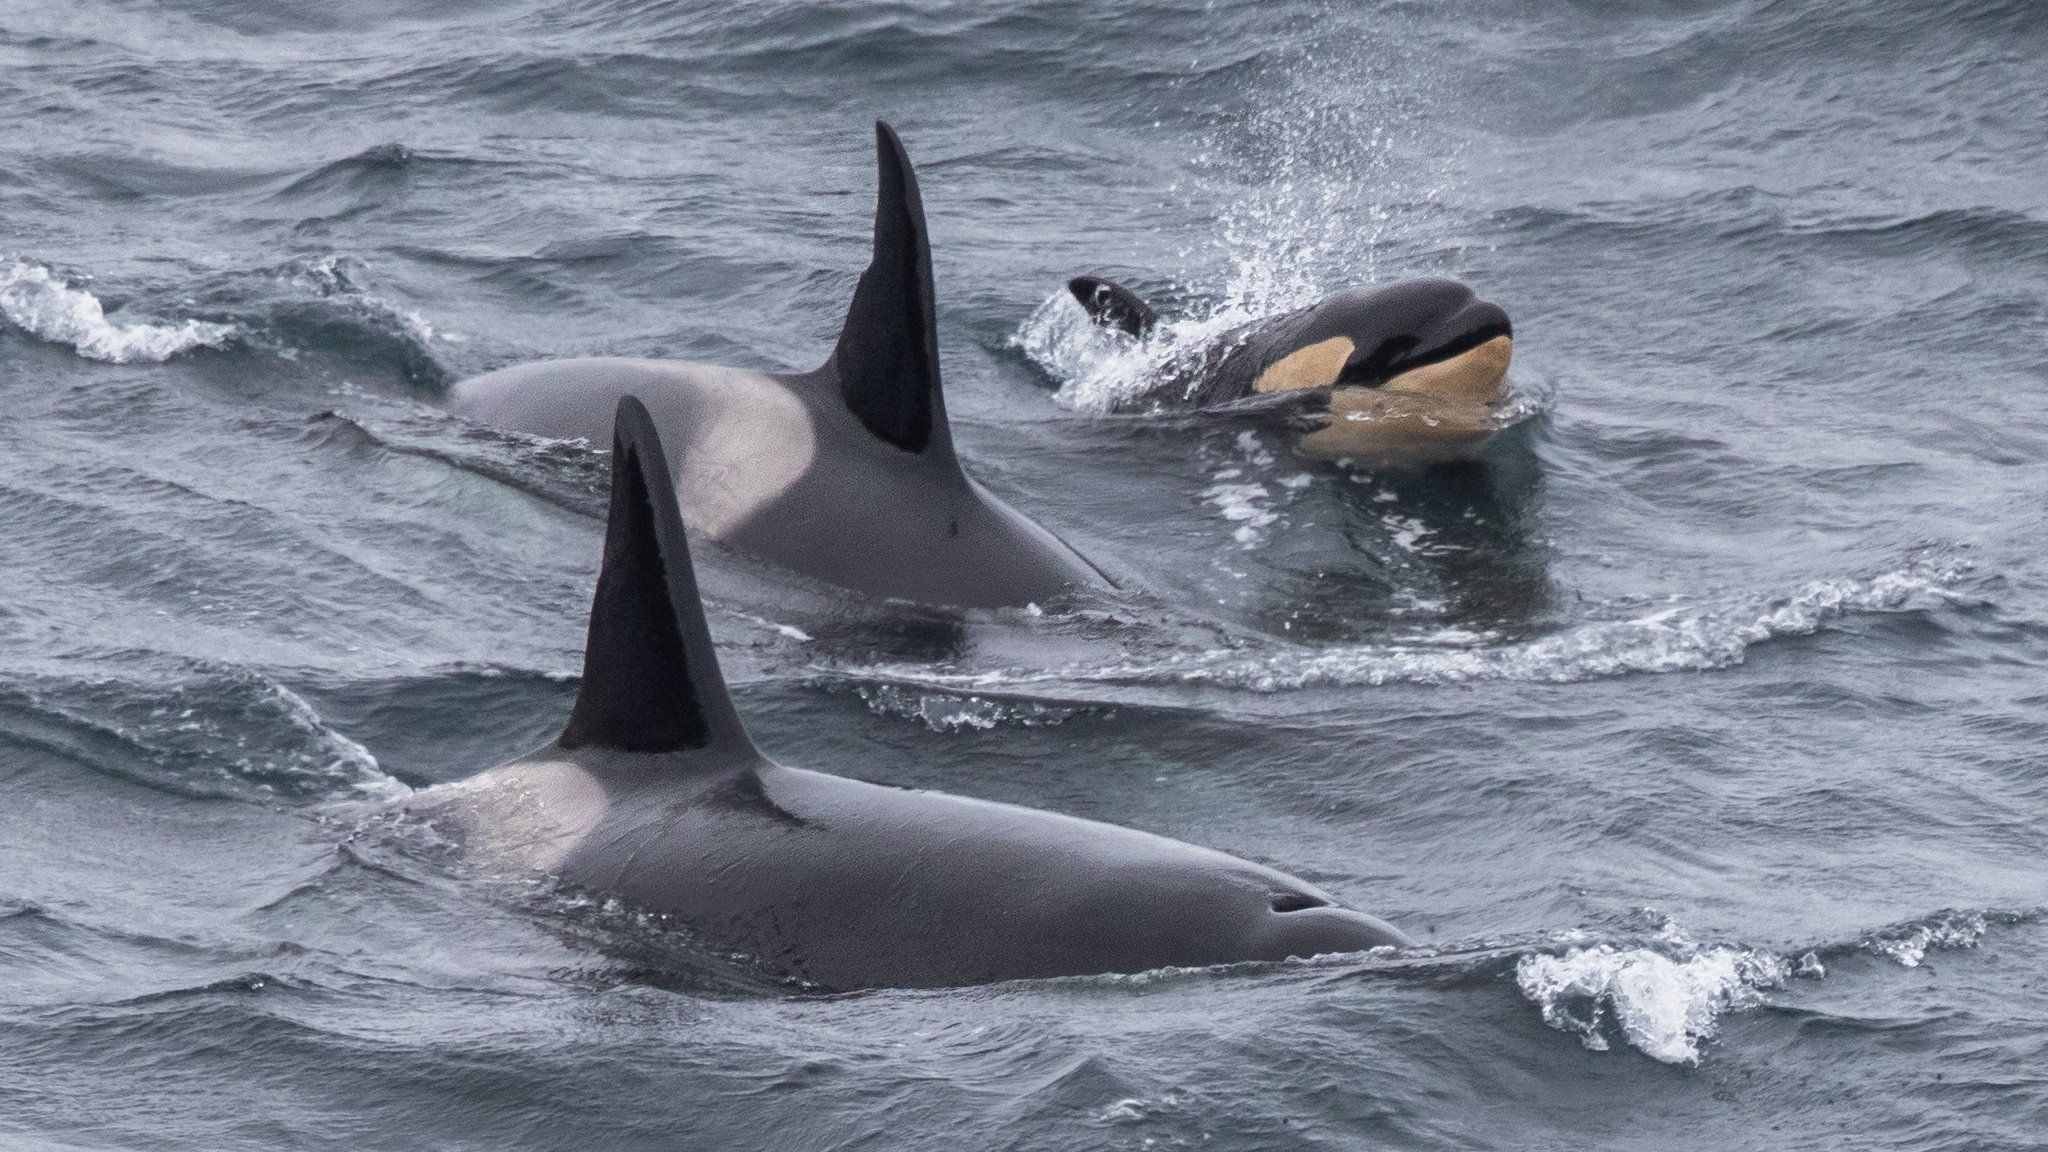 Adult orcas and calf